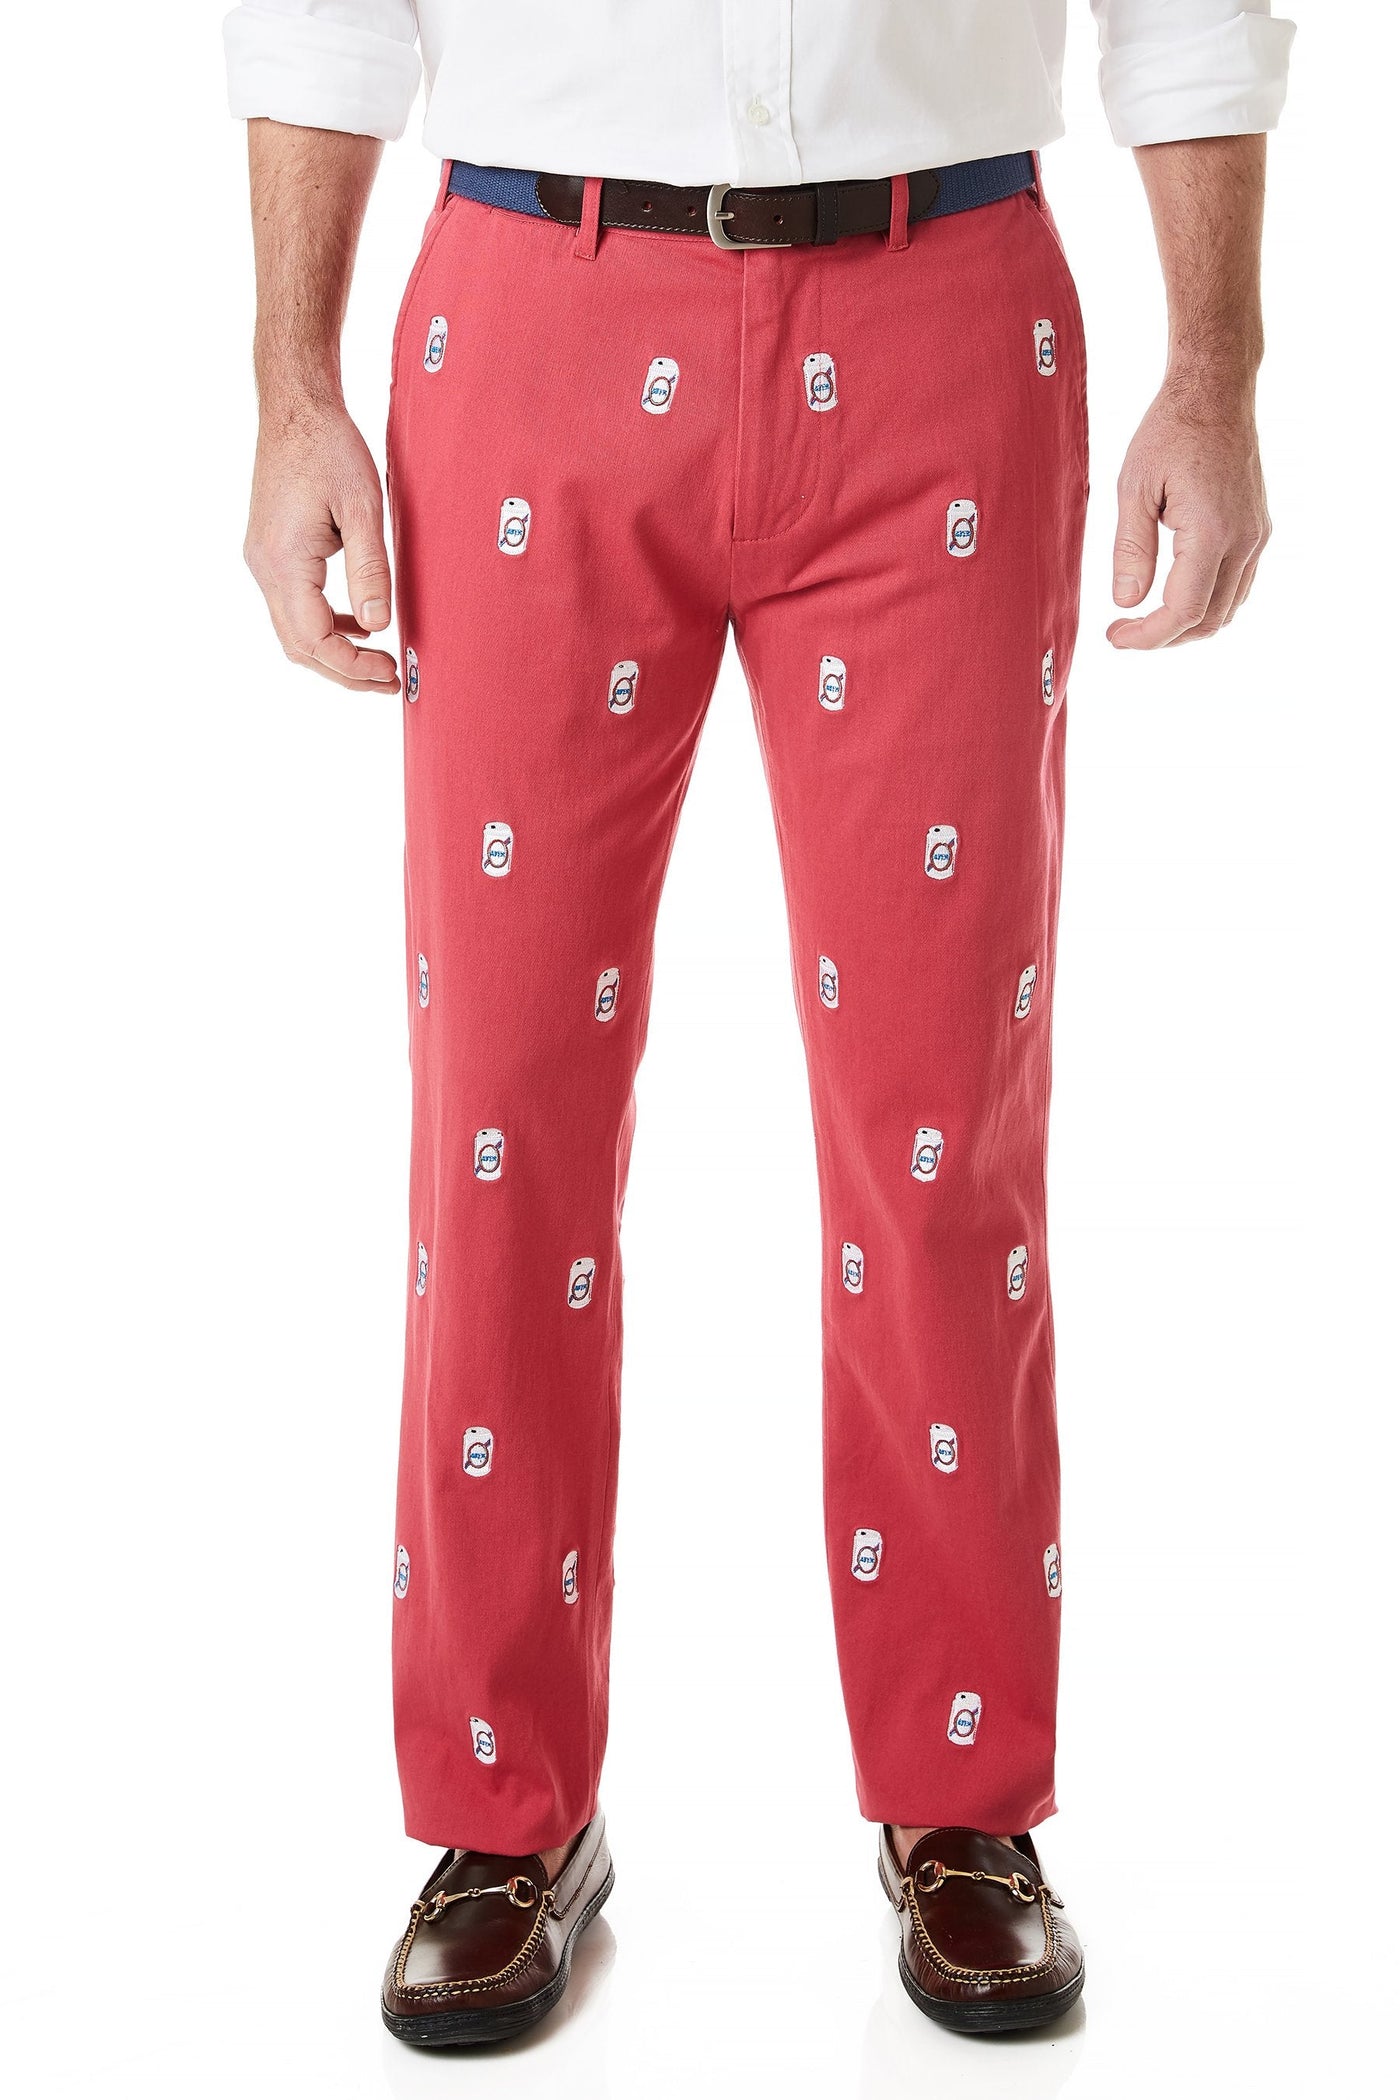 Harbor Pant Stretch Twill Hurricane Red with Beer Cans - Castaway Nantucket Island